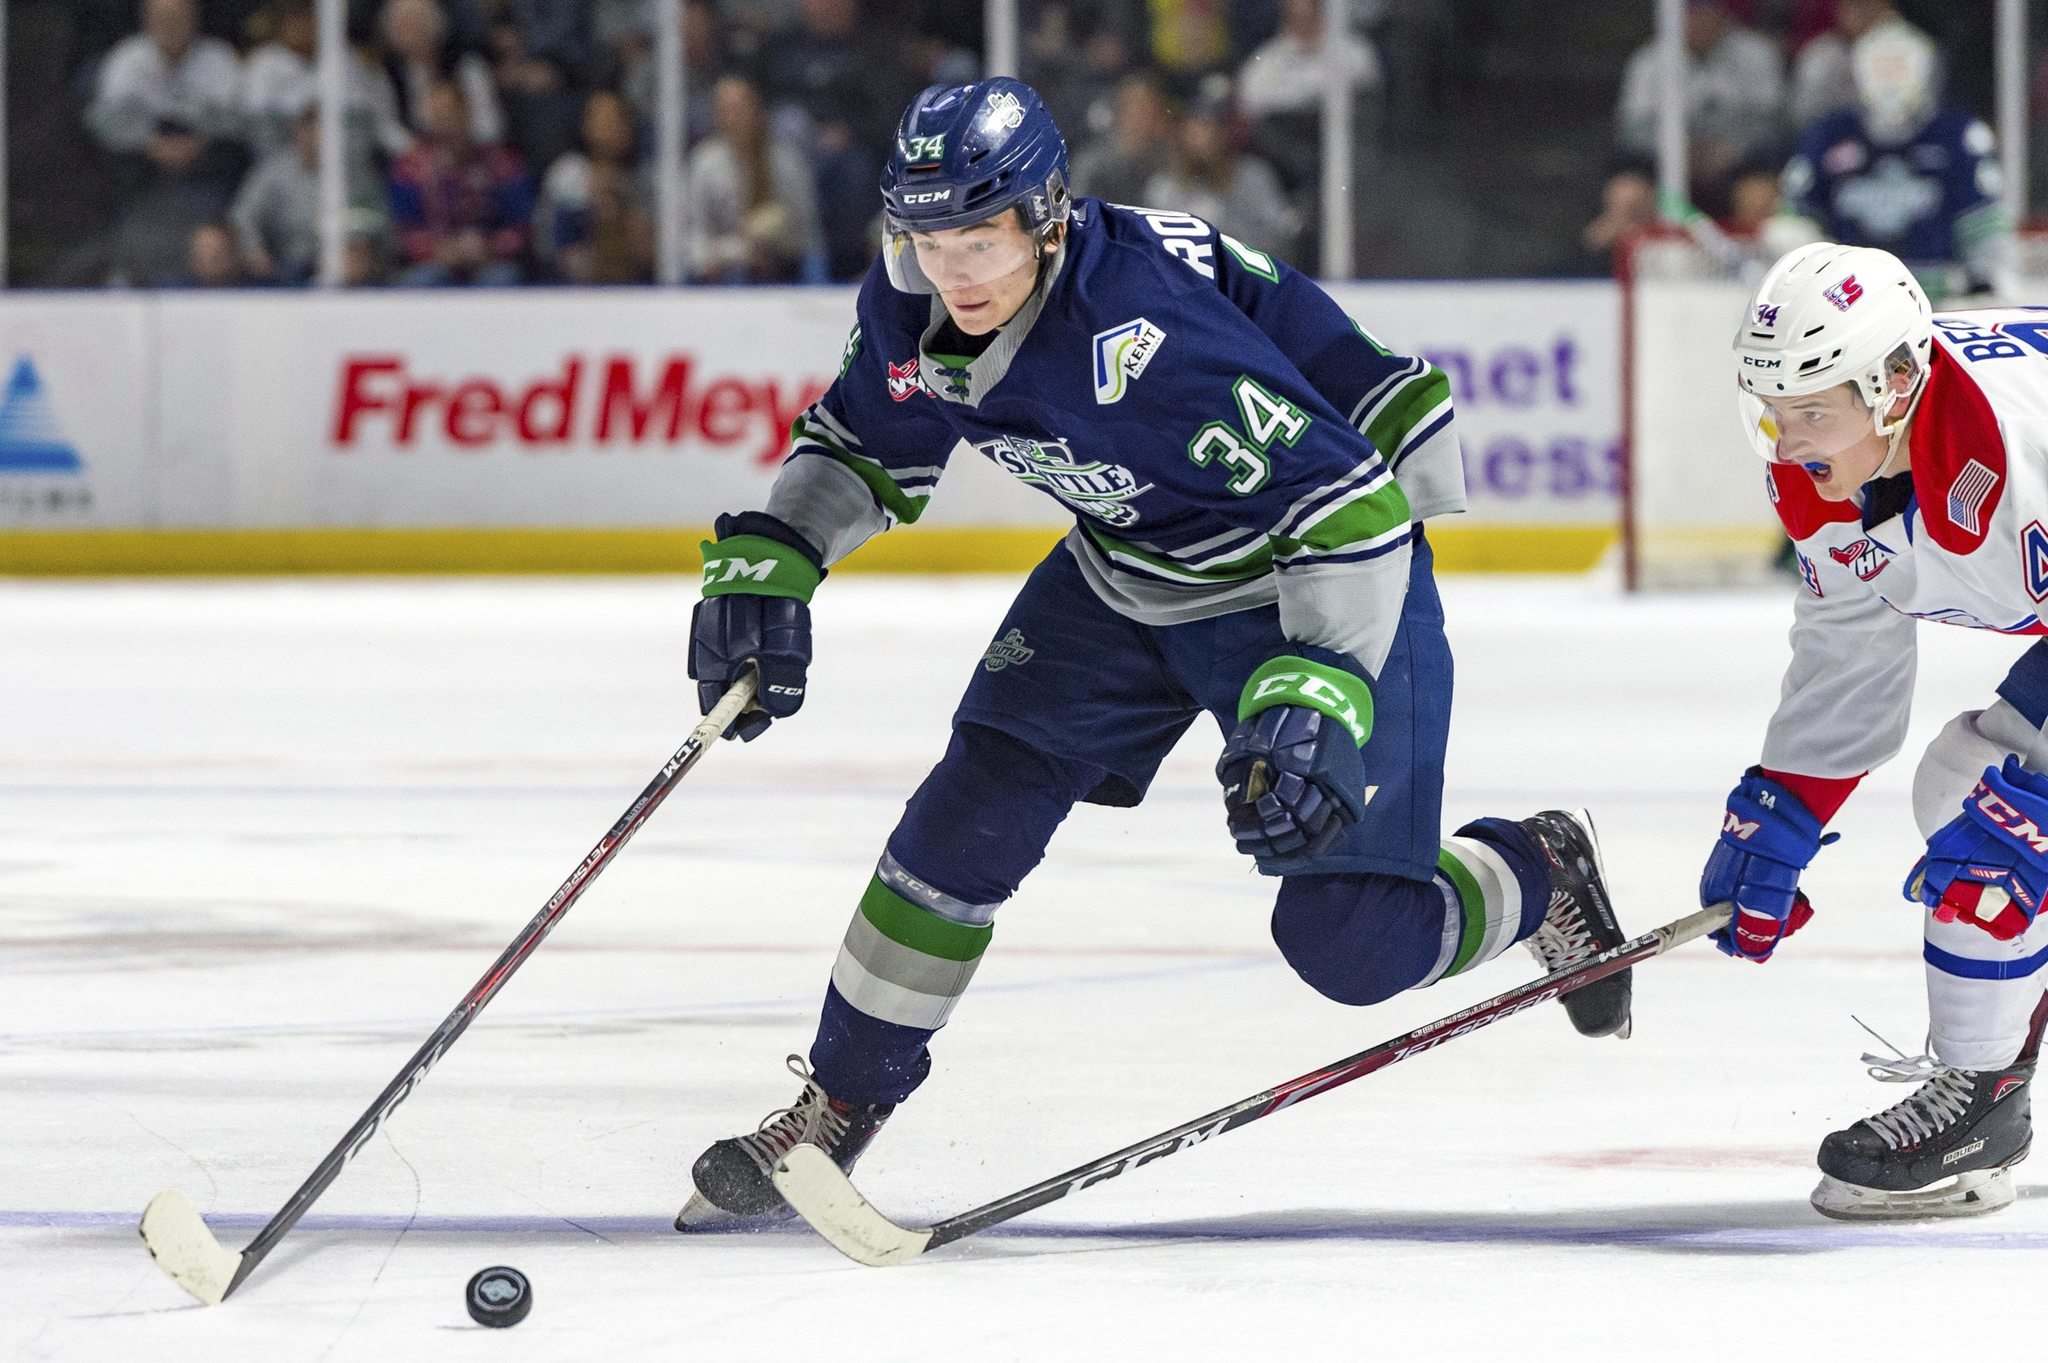 Seattle Thunderbirds forward Conner Roulette skates into the News Photo  - Getty Images